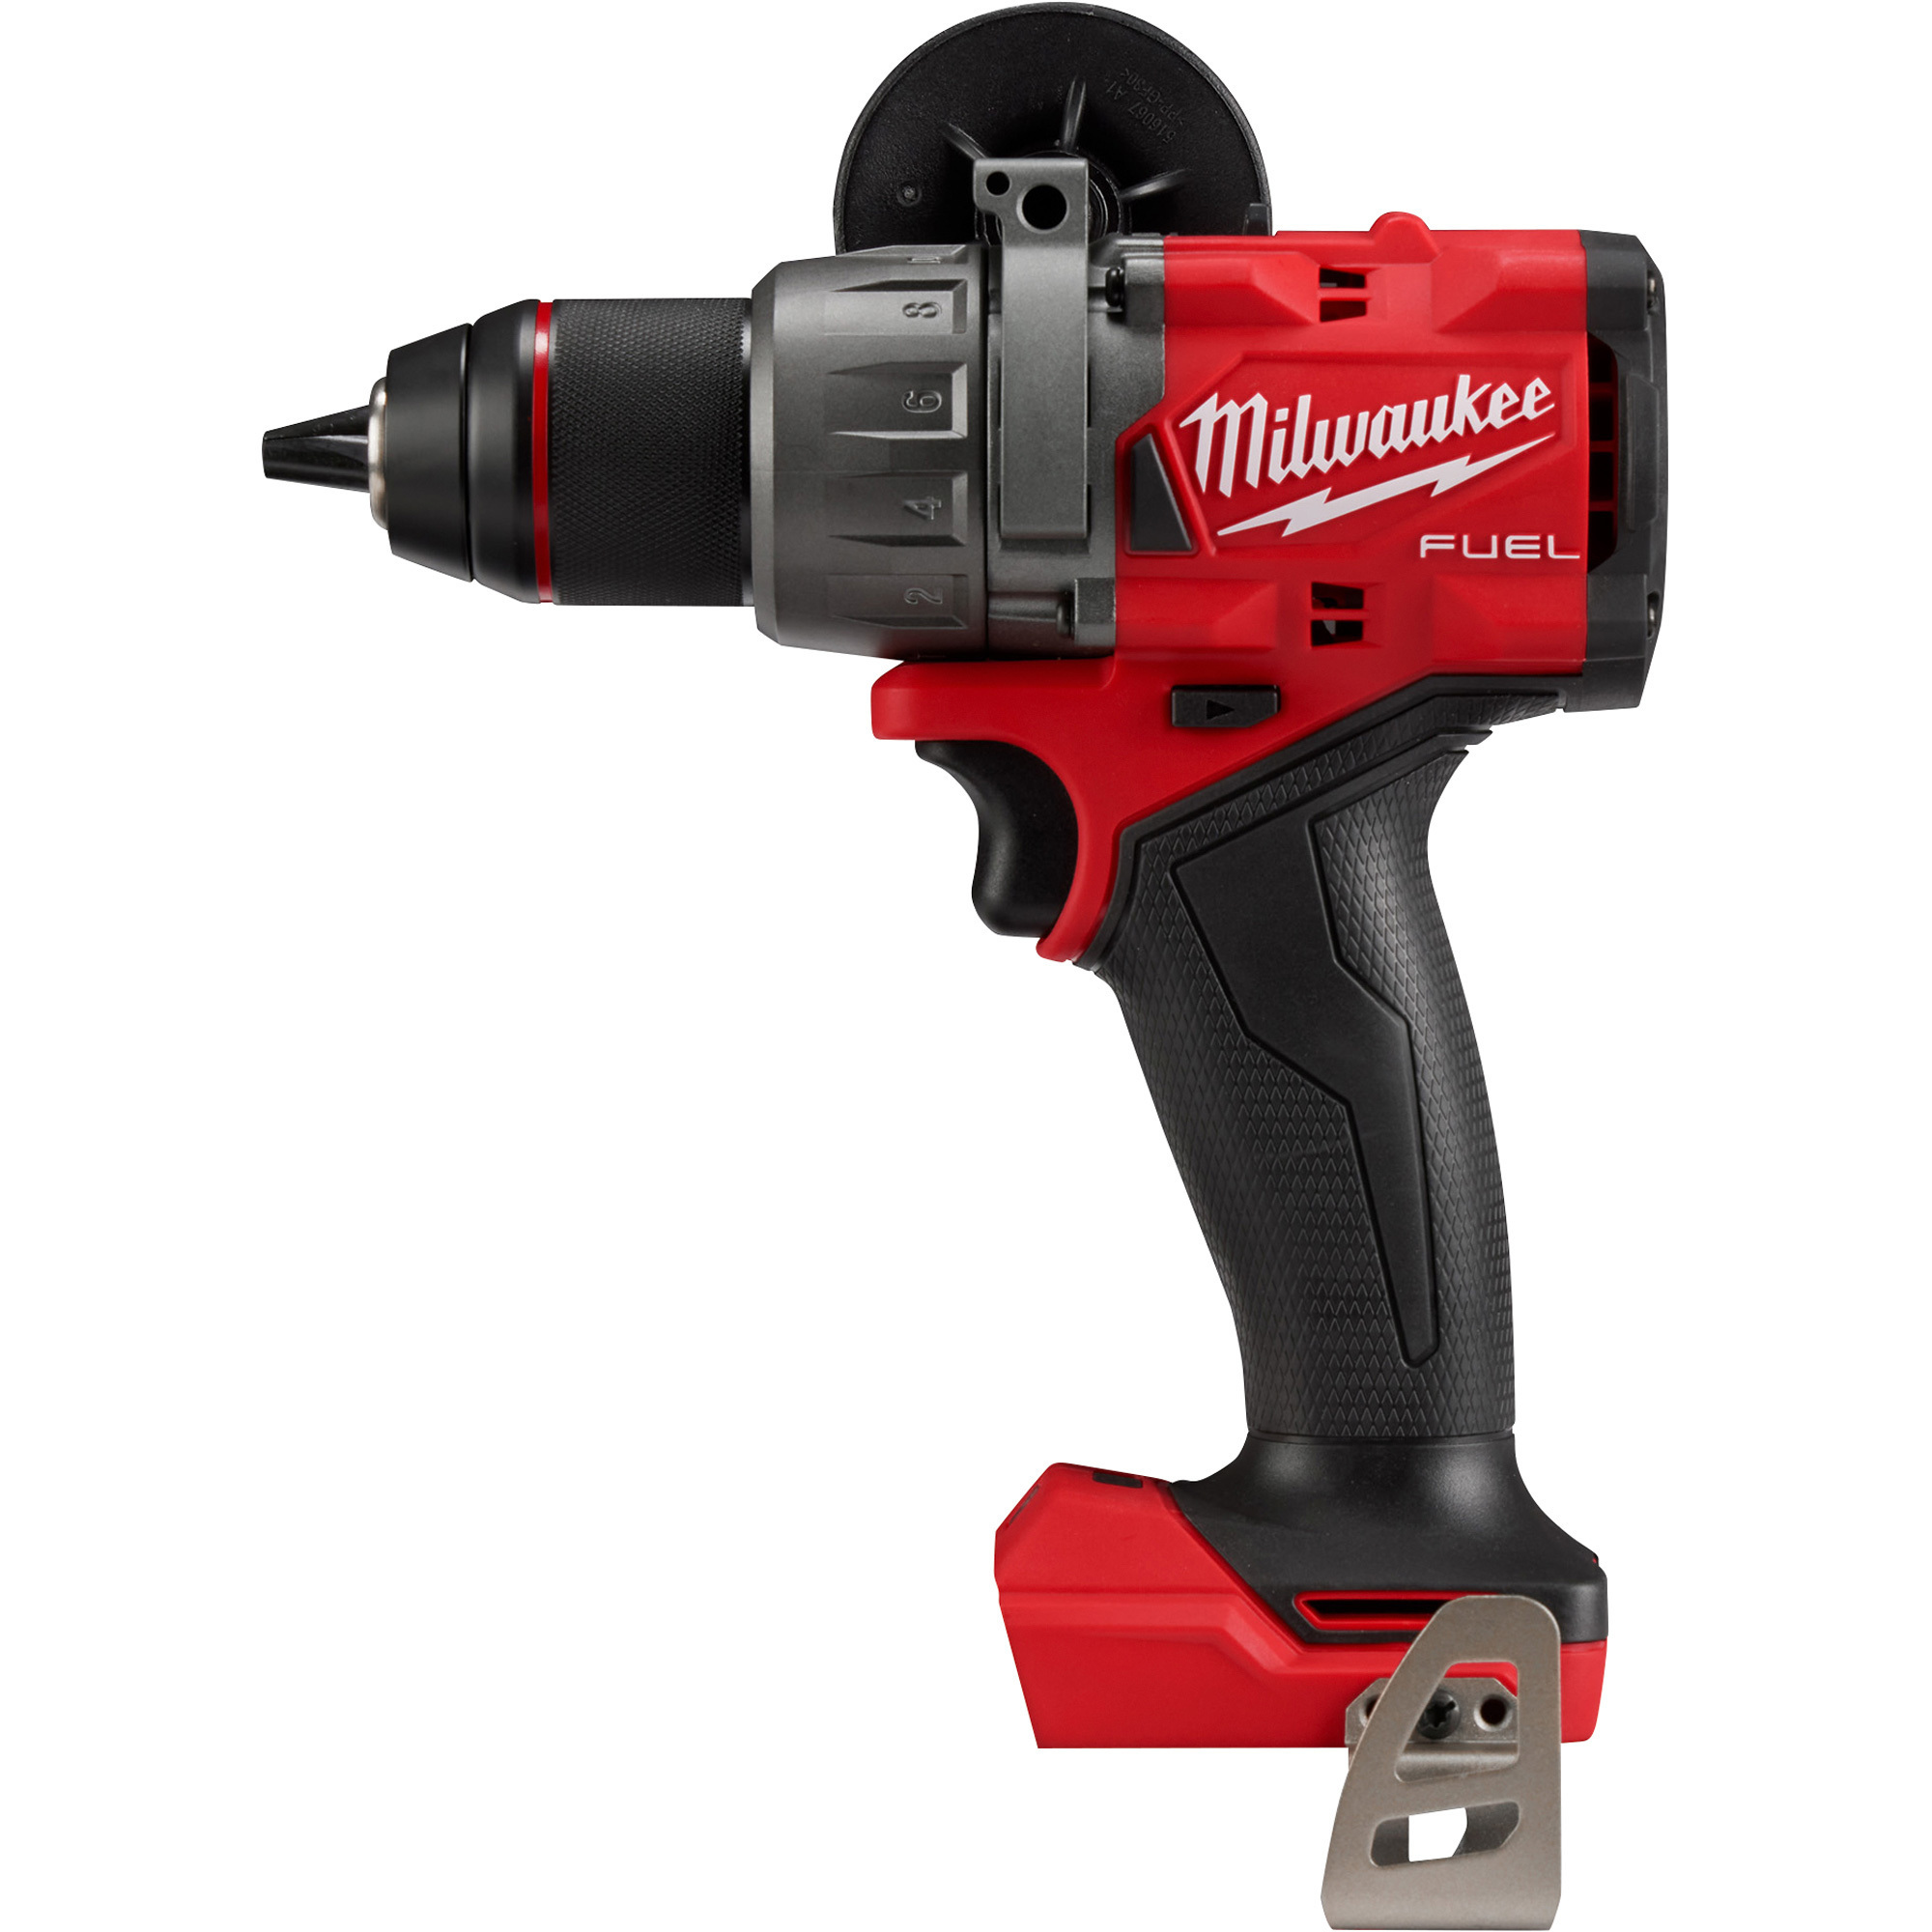 Milwaukee M18 FUEL 1/2Inch Drill/Driver, Tool Only, Model 2903-20